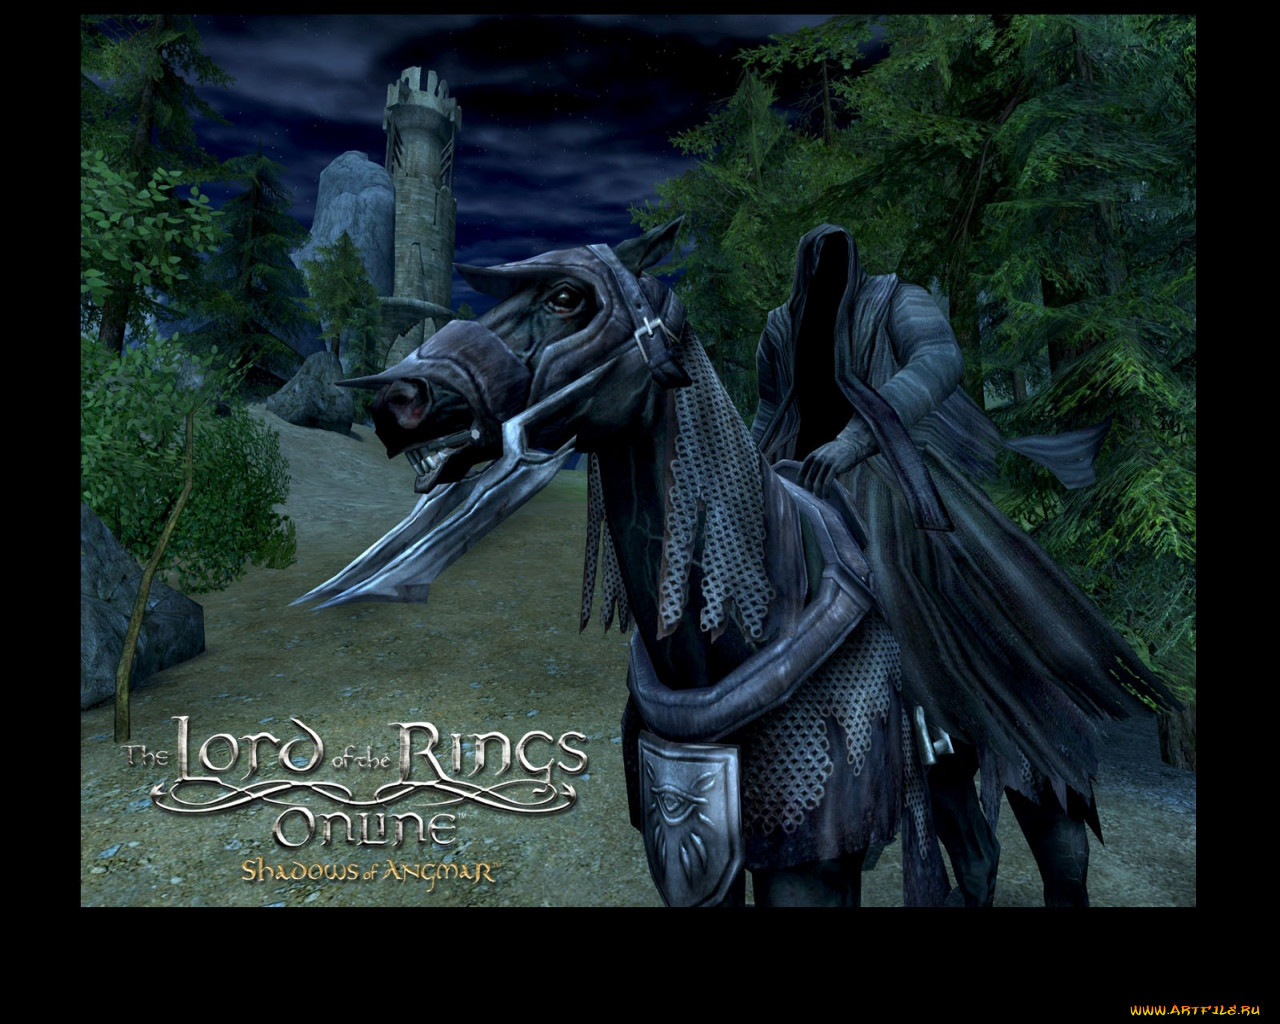 , , the, lord, of, rings, online, shadows, angmar